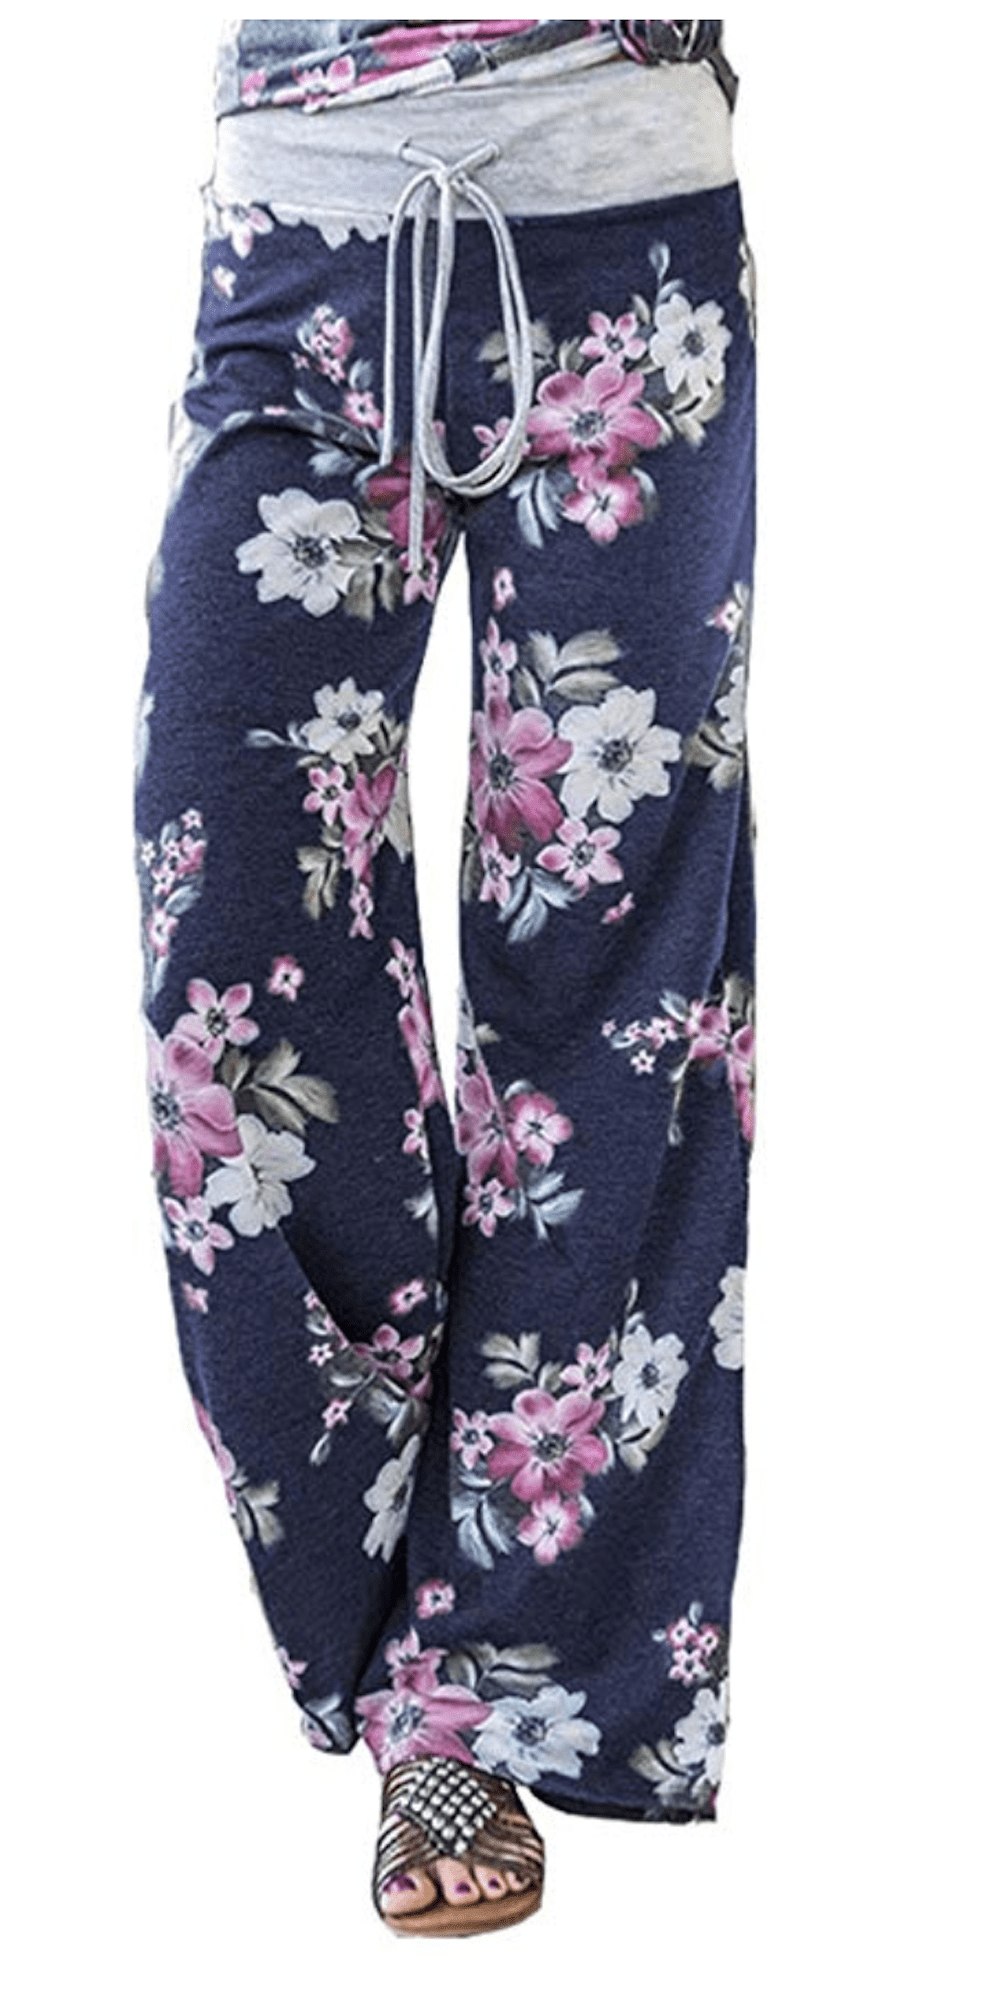 Women's Printed Wide-Leg Pants Comfy Stretch Floral Print Drawstring Lounge Trousers Casual Stretchy Casualpants 3X-Large,Grey 5